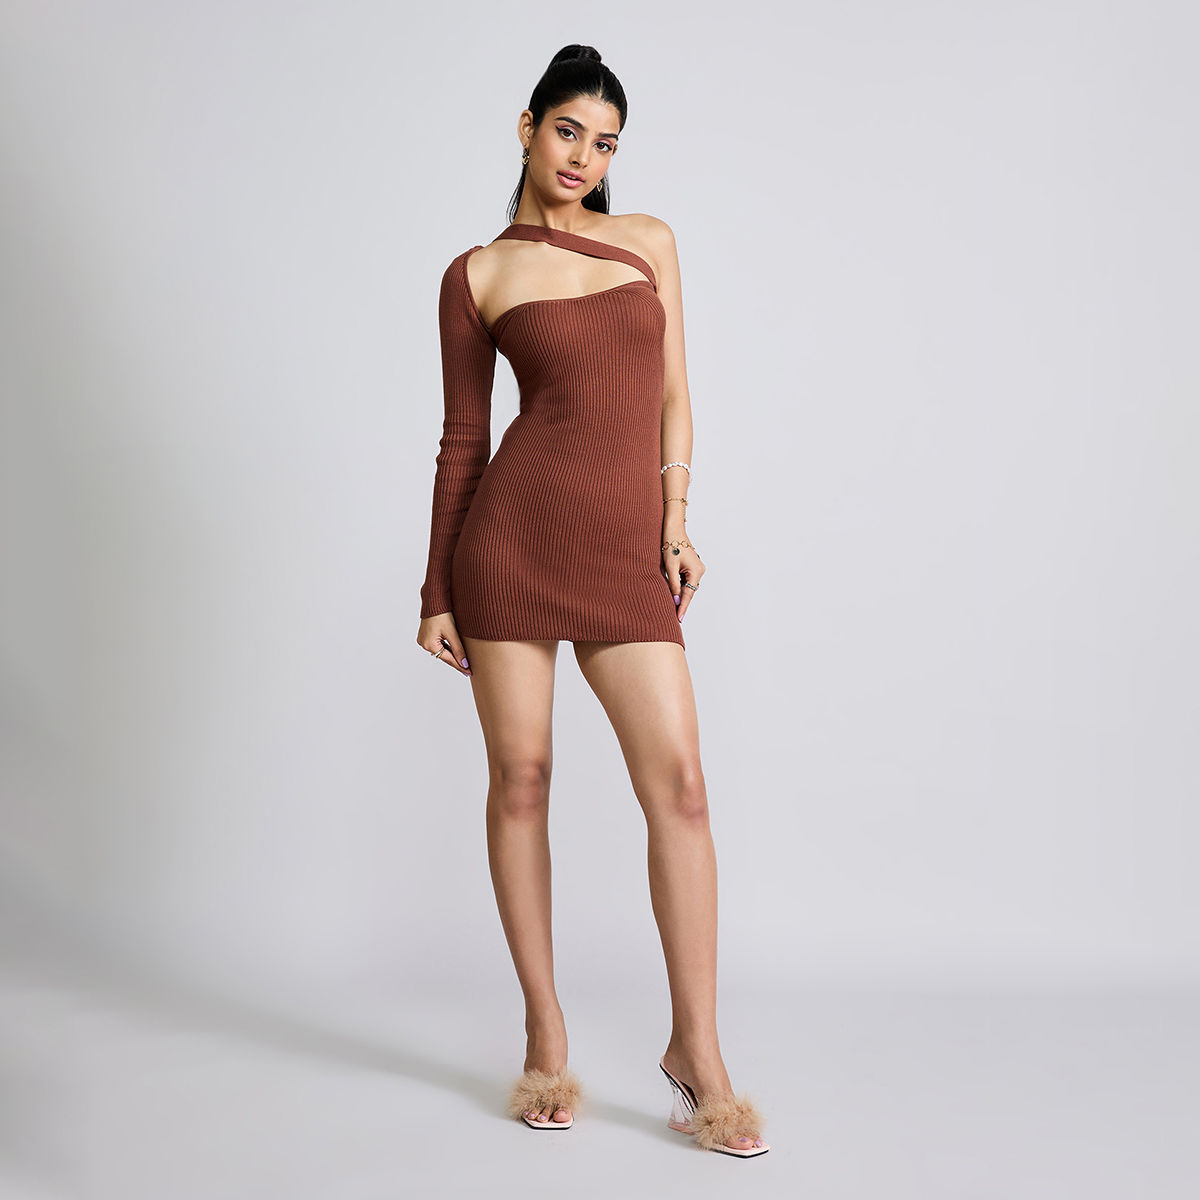 Buy bodycon dress under 500 in India @ Limeroad